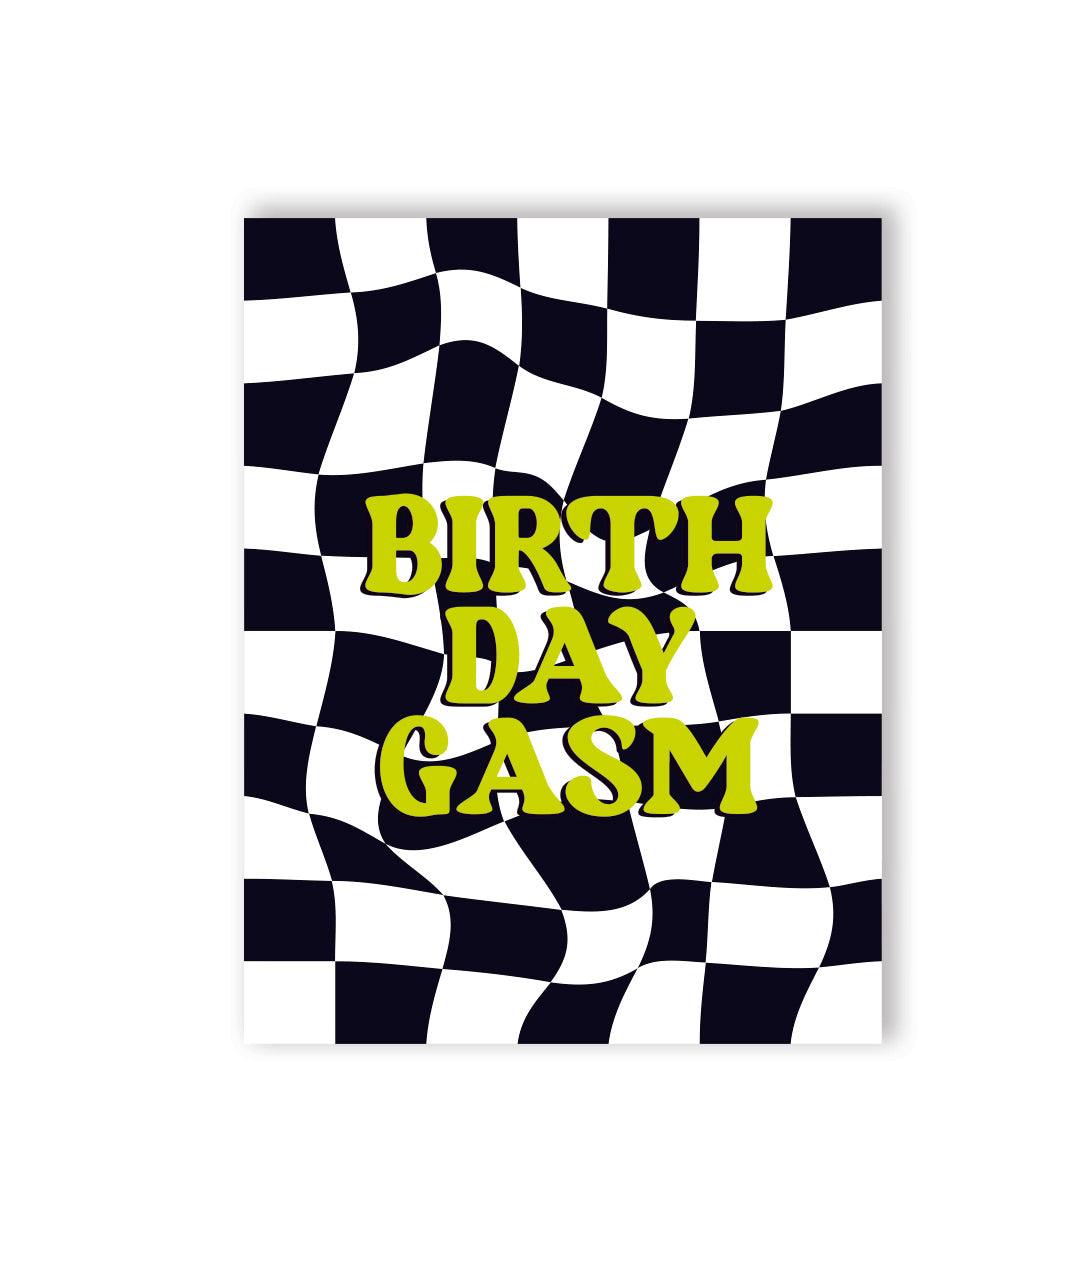 The Birthday-Gasm Naughty Greeting Card features a black and white checkerboard flag background with the text &quot;BIRTHDAY GASM&quot; written in an uppercase lime green text